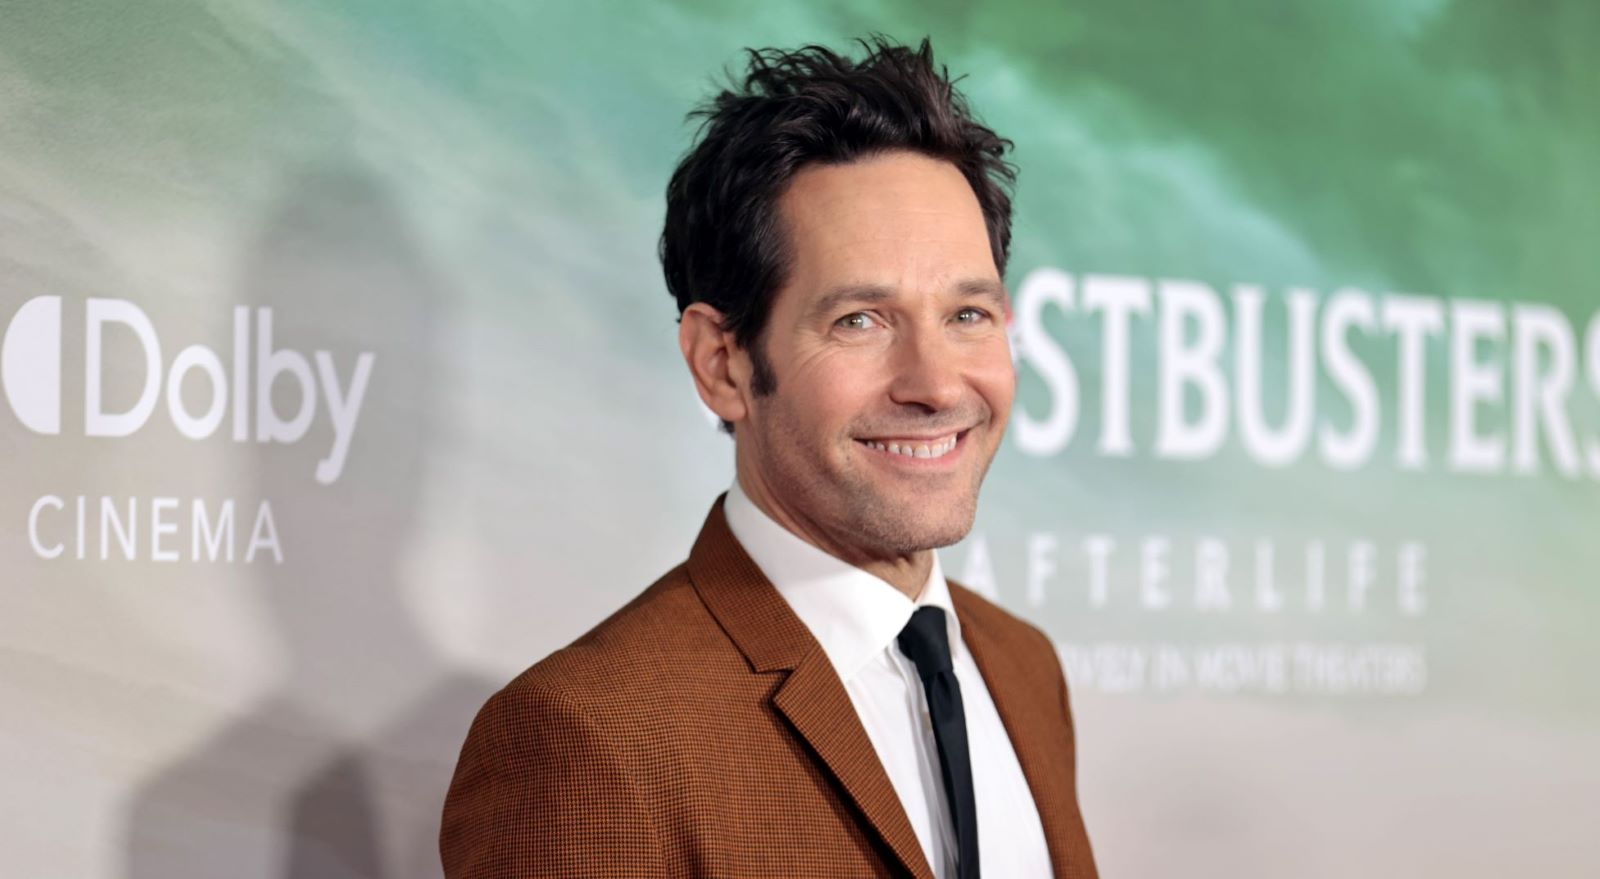 Paul Rudd attends Ghostbusters: Afterlife premiere